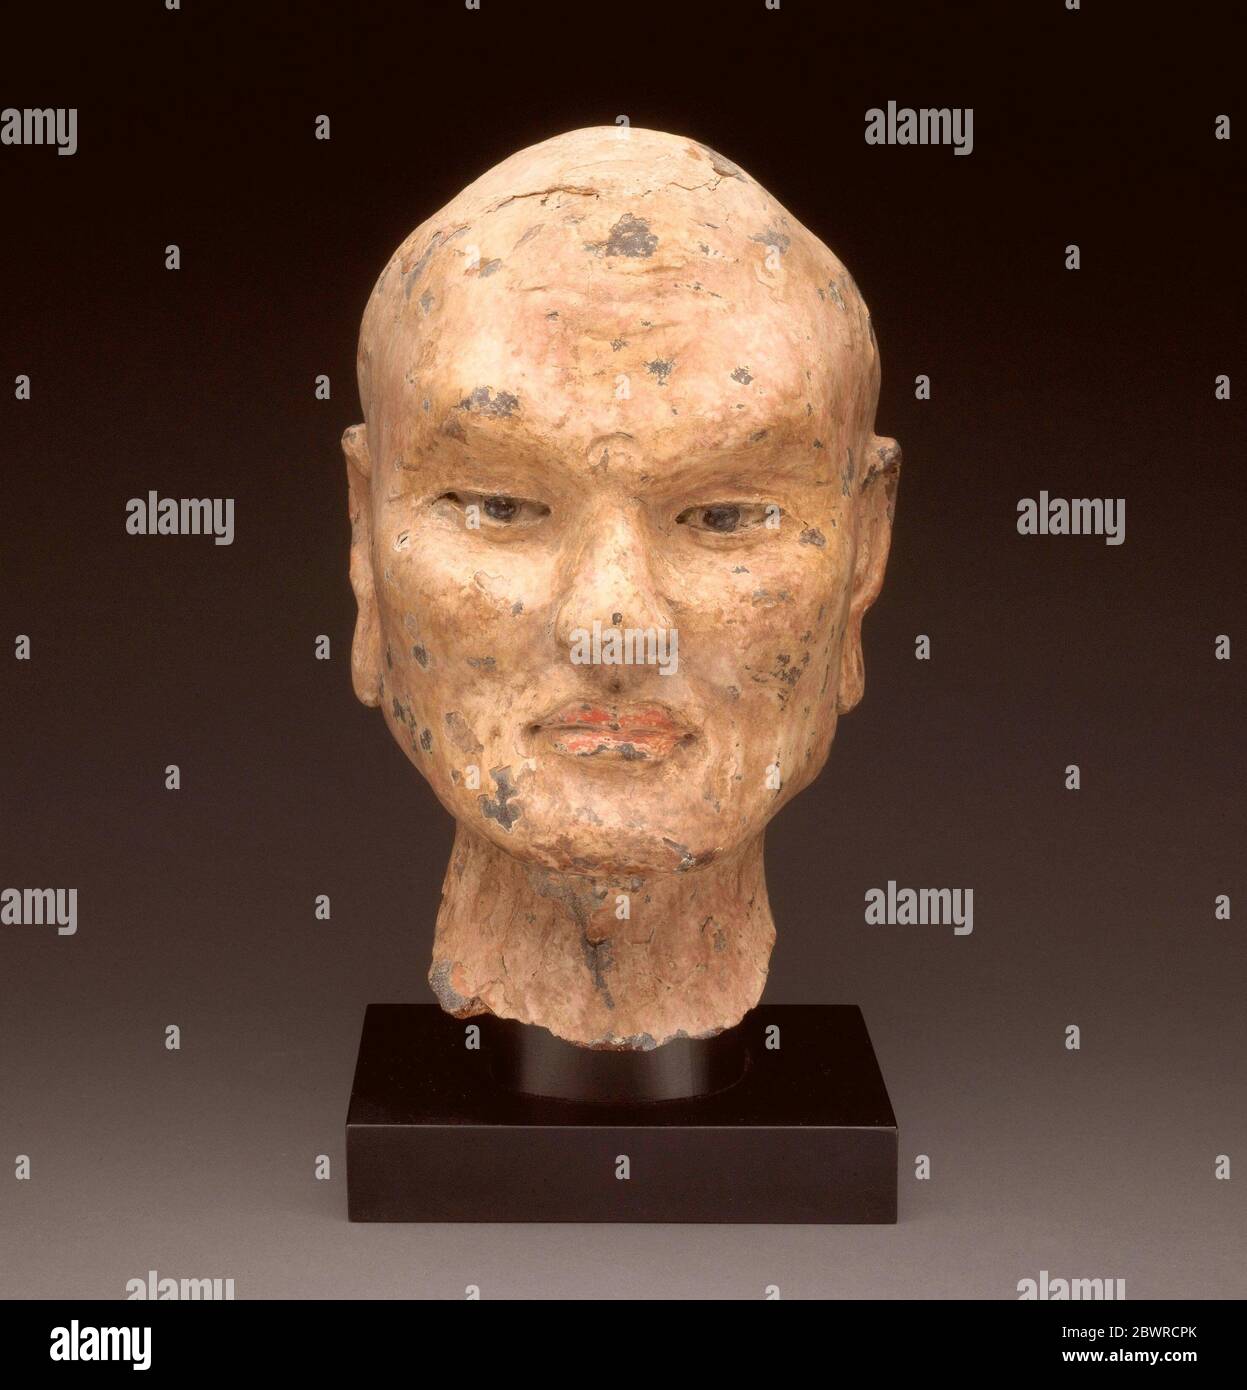 Head of Luohan - Northern Song, Liao, or Jin dynasty, c. 11th century - China. Hollow dry lacquer. 999 AD'1099. Stock Photo